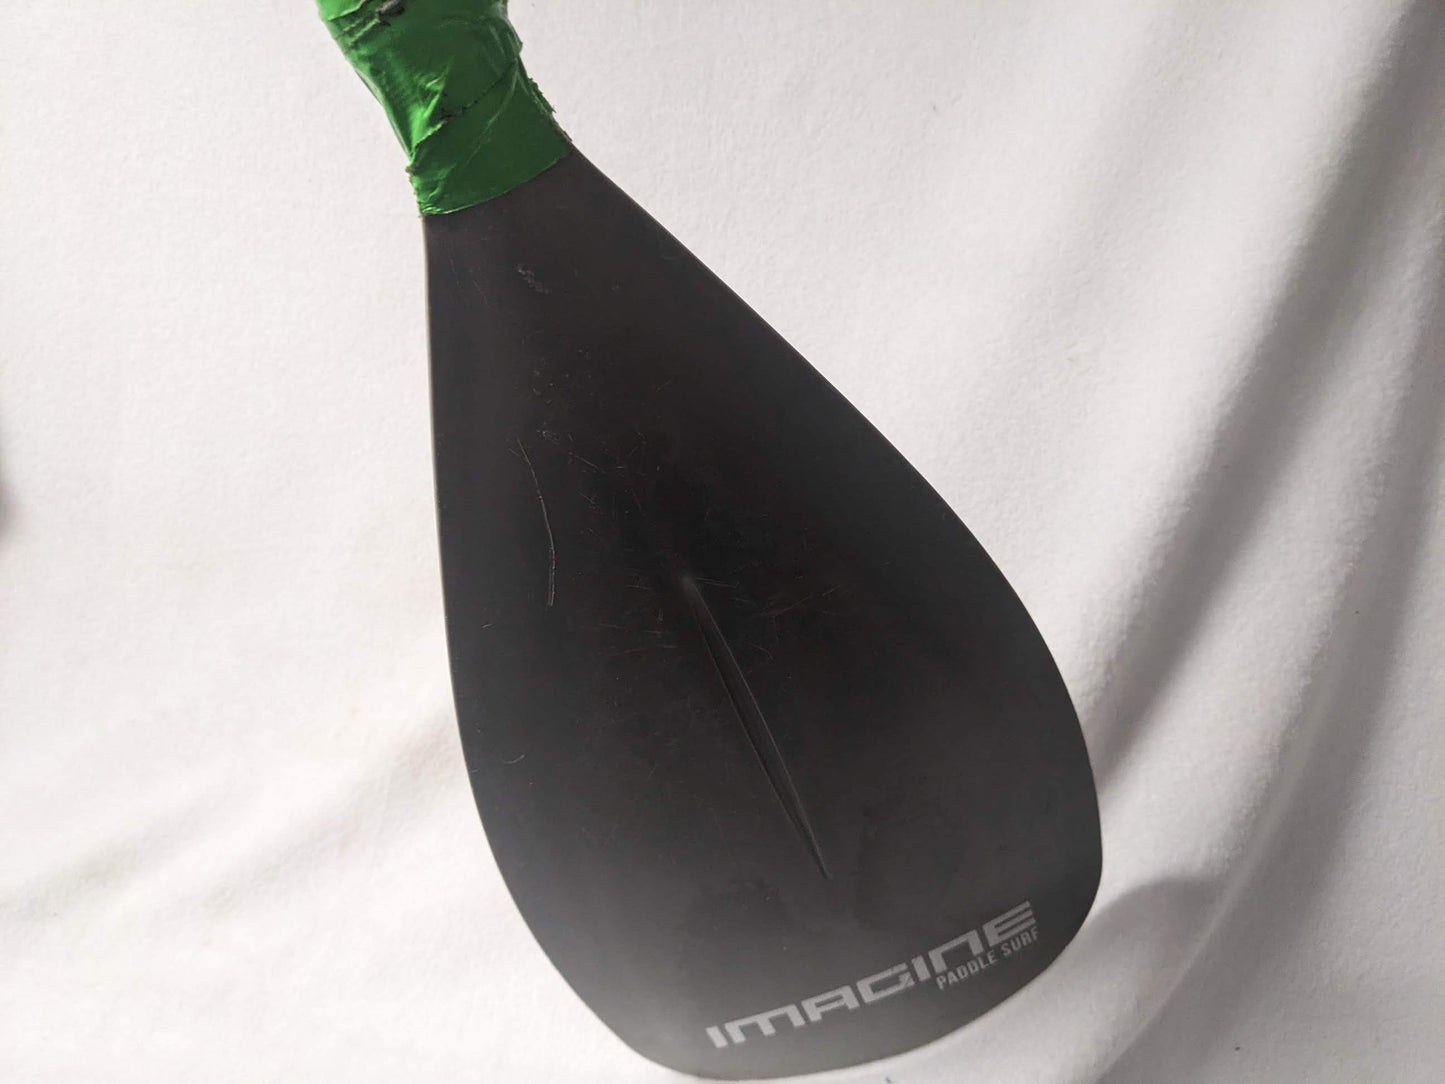 Imagine Paddleboard Paddle Size 65 In Color Black Condition Used